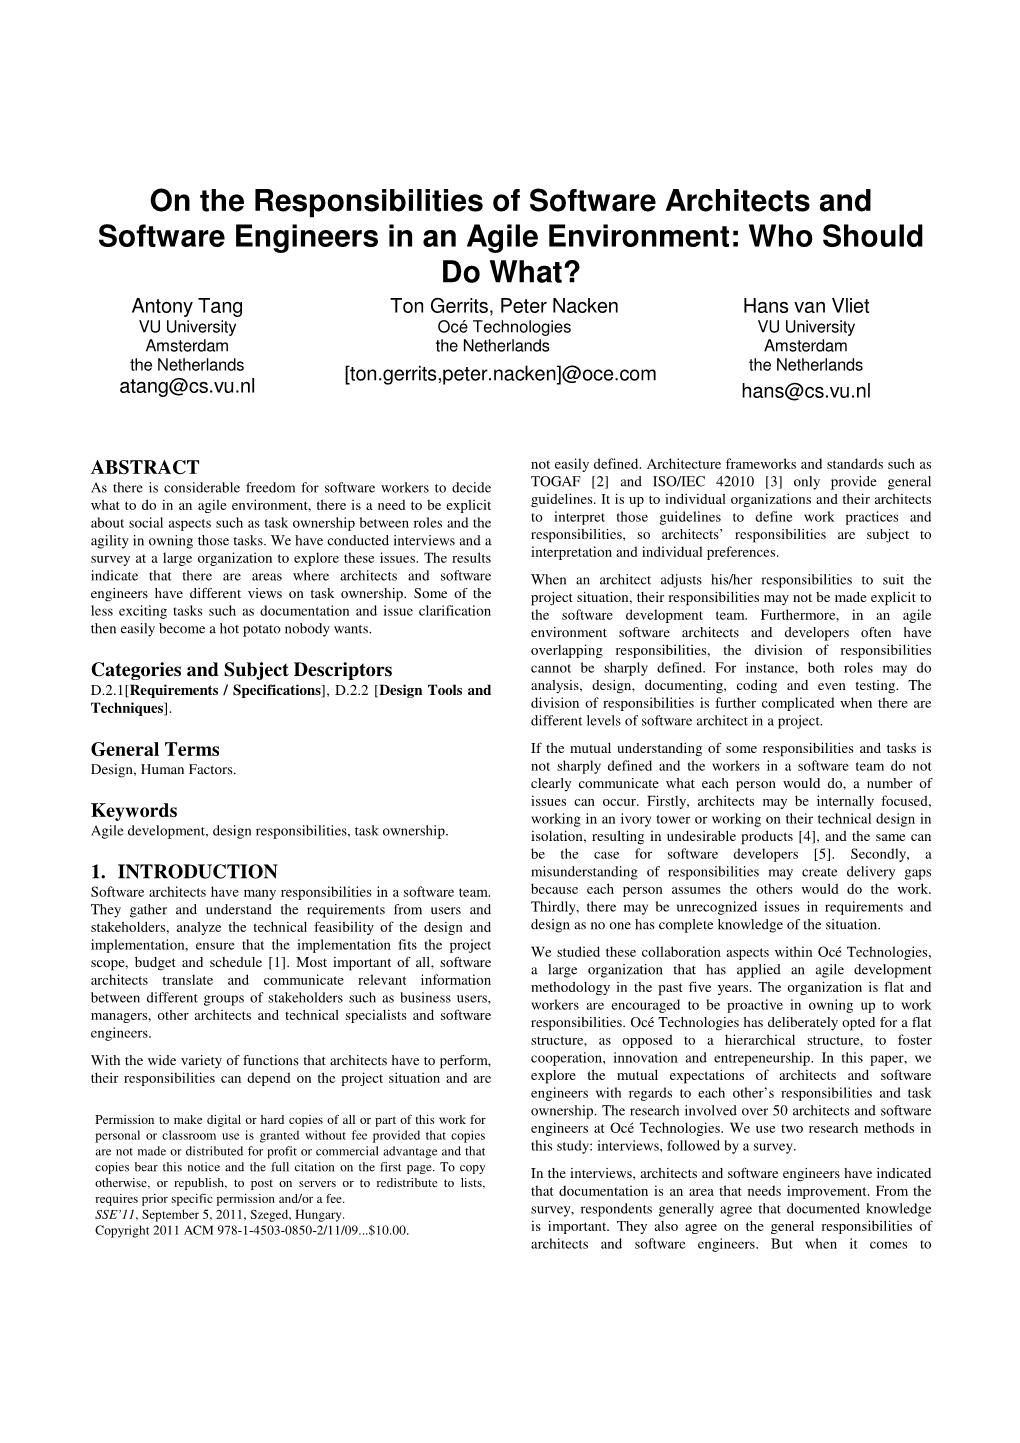 On the Responsibilities of Software Architects and Software Engineers